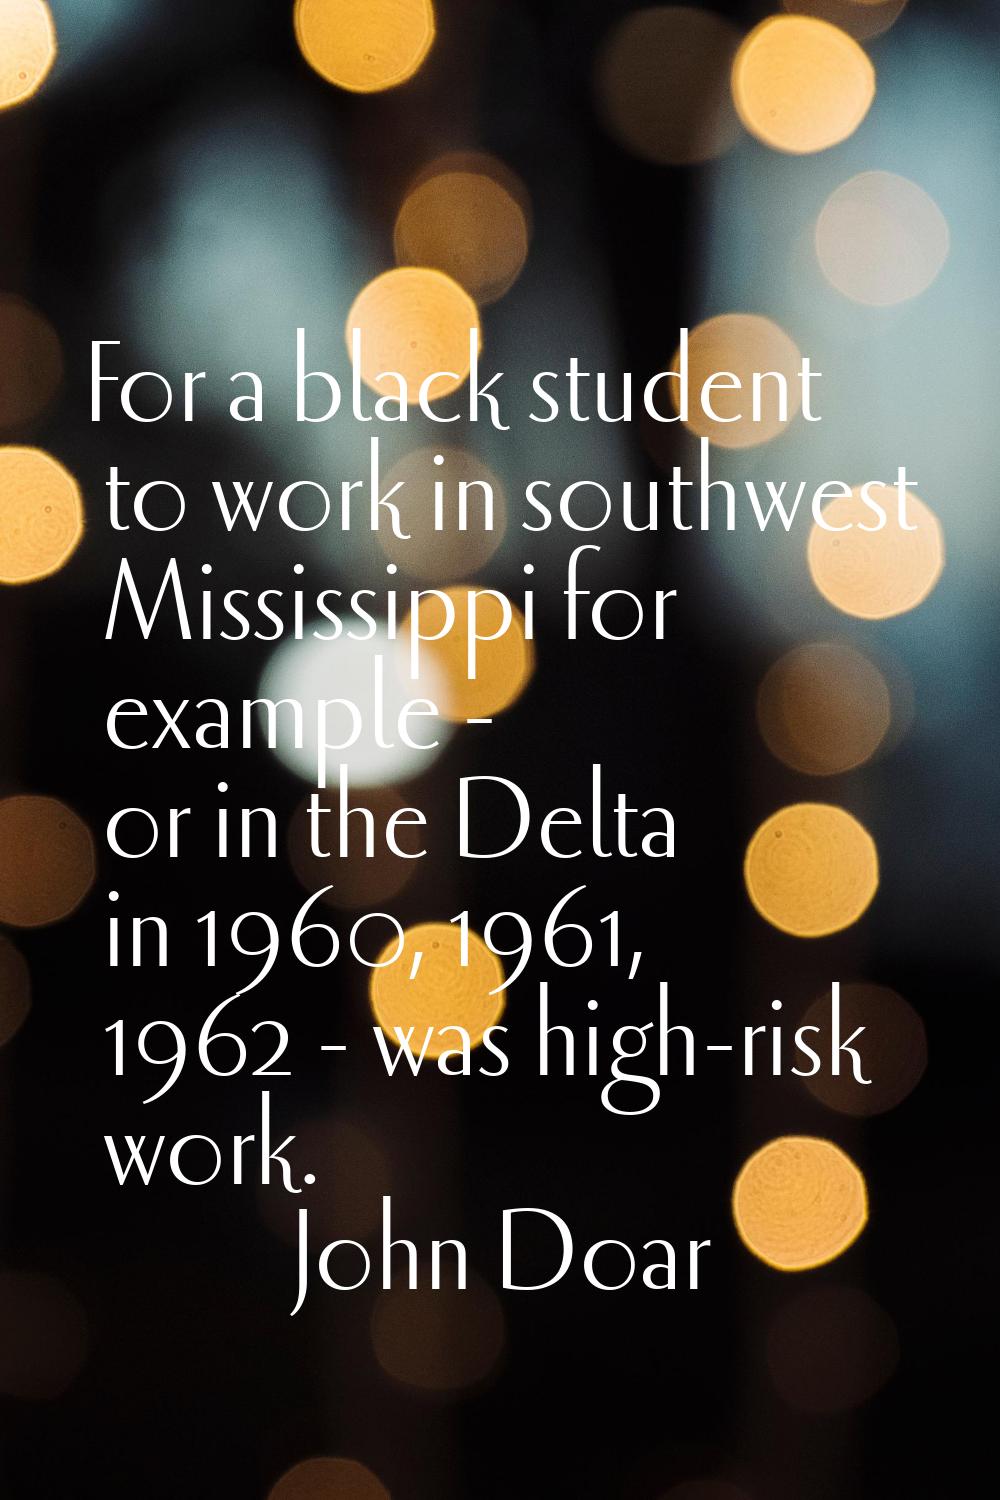 For a black student to work in southwest Mississippi for example - or in the Delta in 1960, 1961, 1